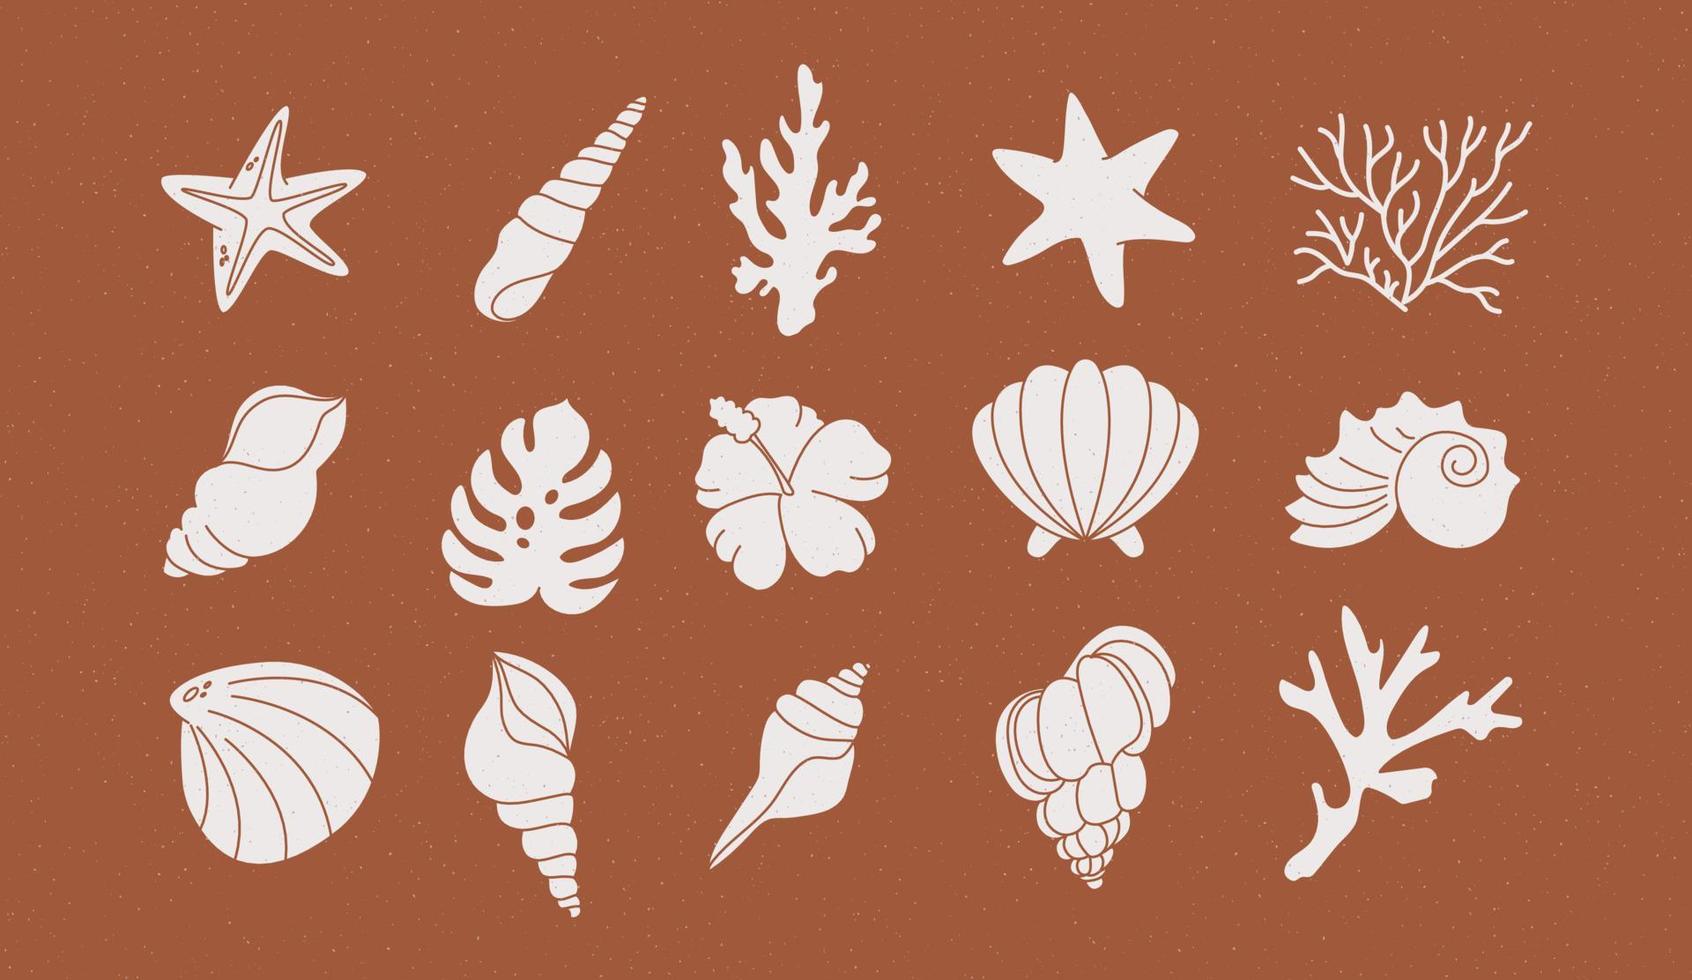 Summer icons set with corals, palm leaves and seashells. Cute sea, ocean and brown background with sand. For social media, accommodation rental and travel services. vector